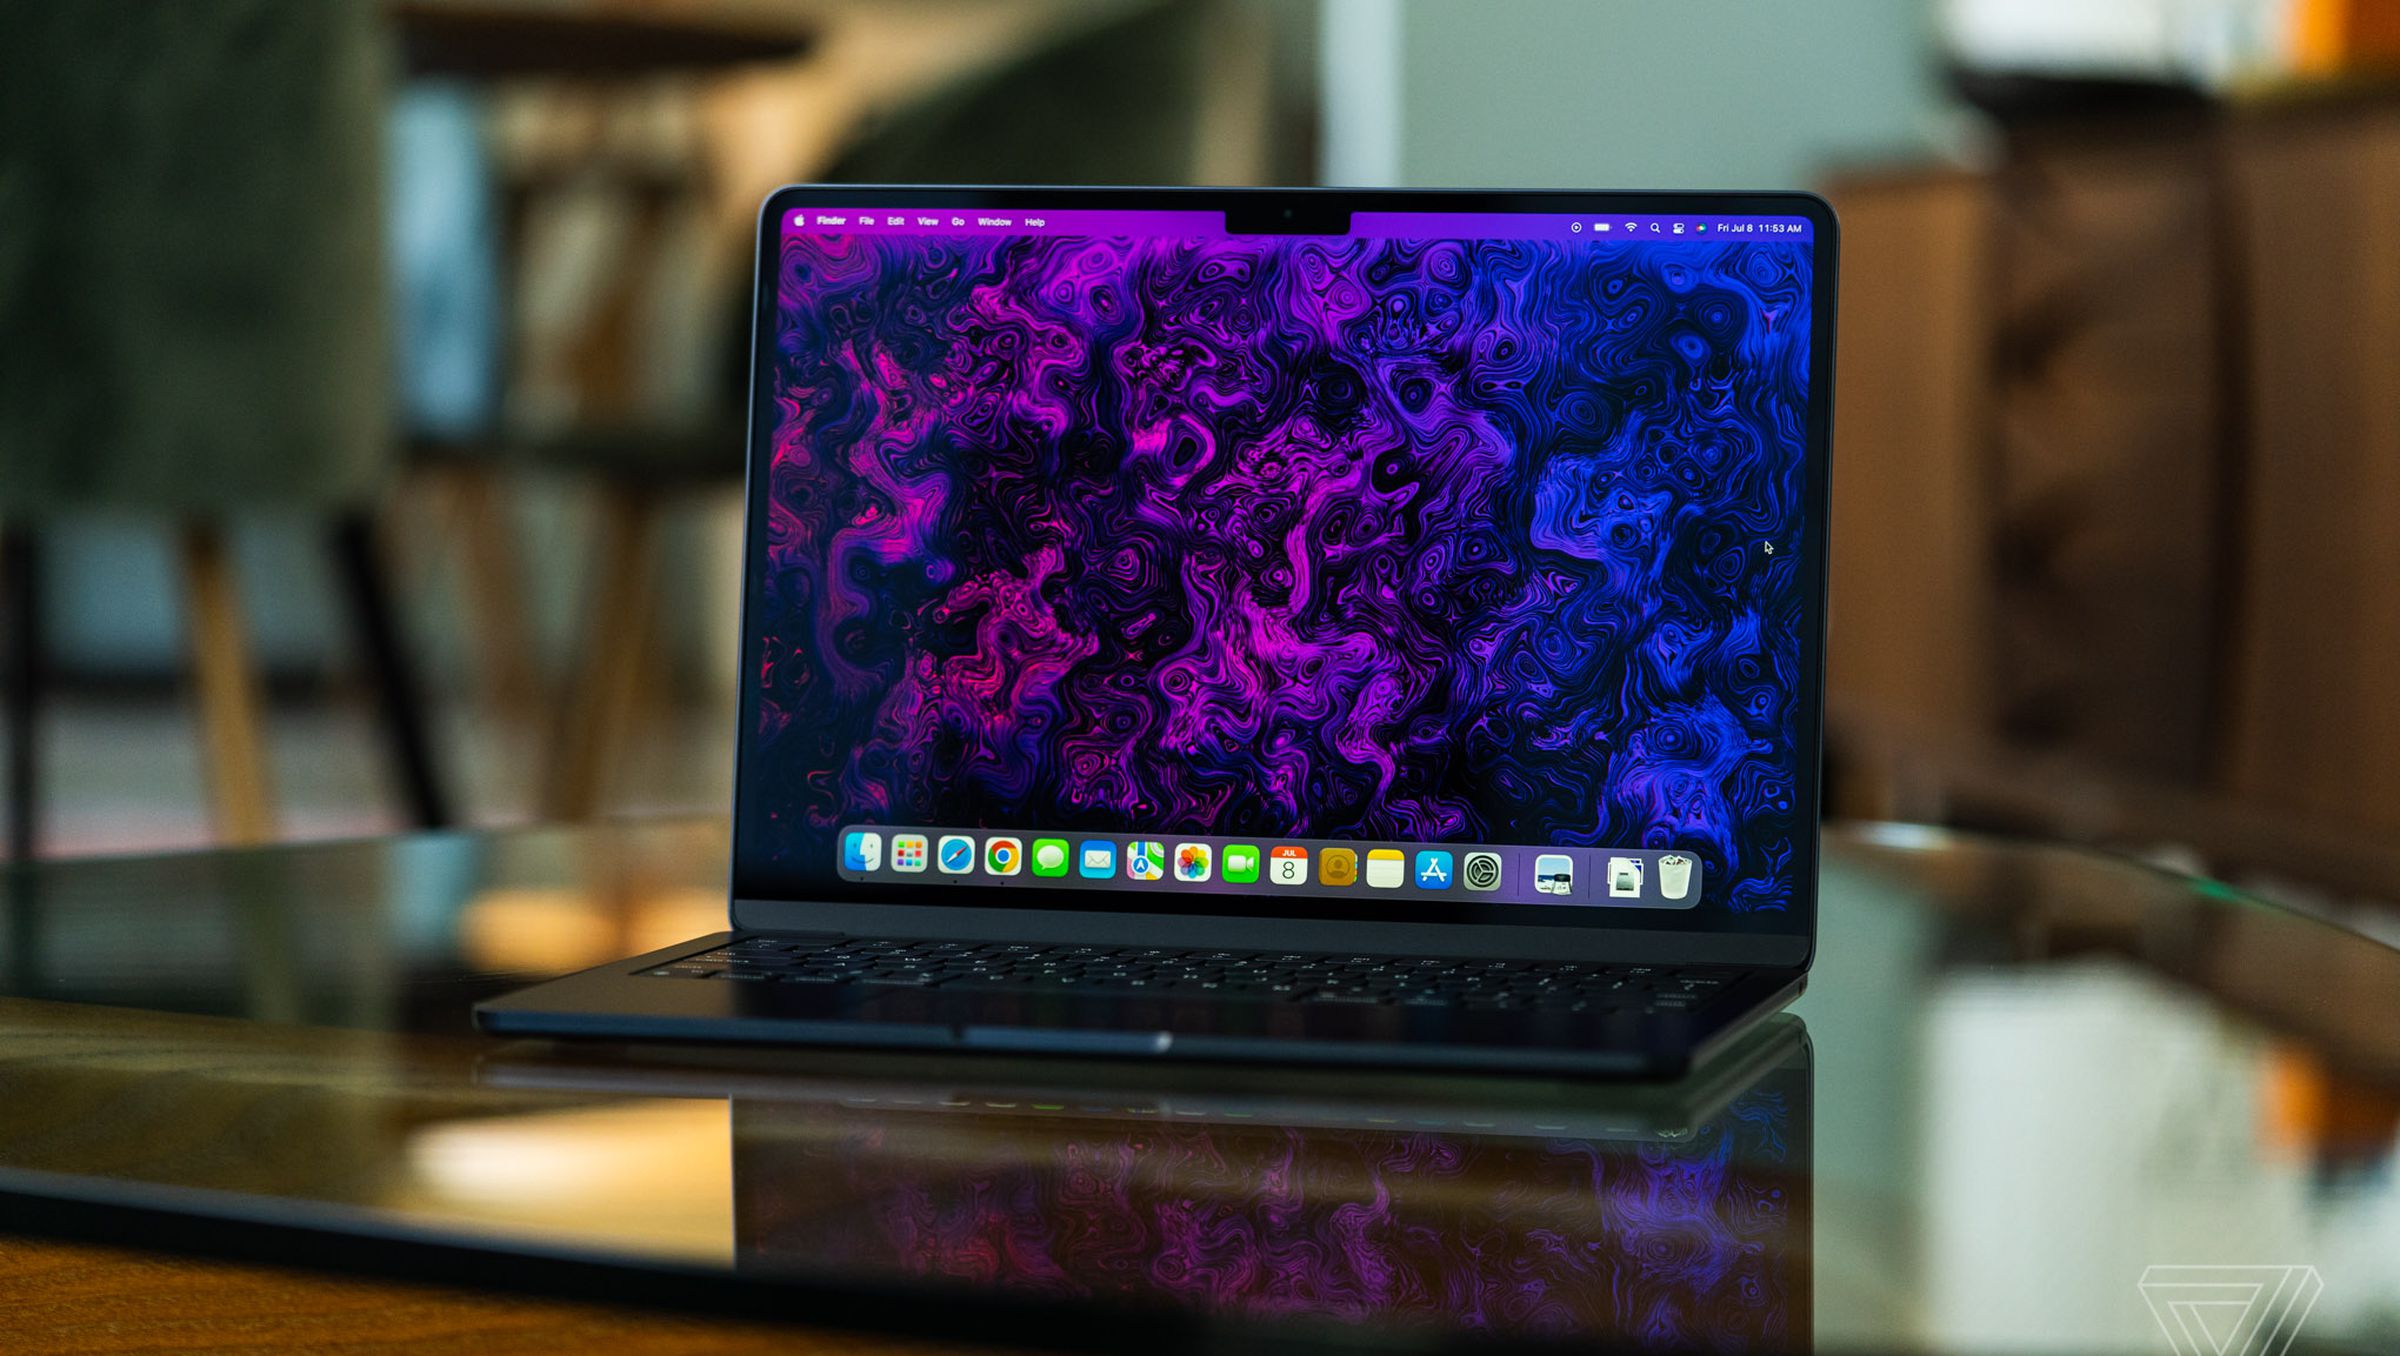 The M2 MacBook Air is opened, facing the camera. Its display is on, showcasing a psychedelic purple and black wallpaper created by The Verge’s art and illustration team.